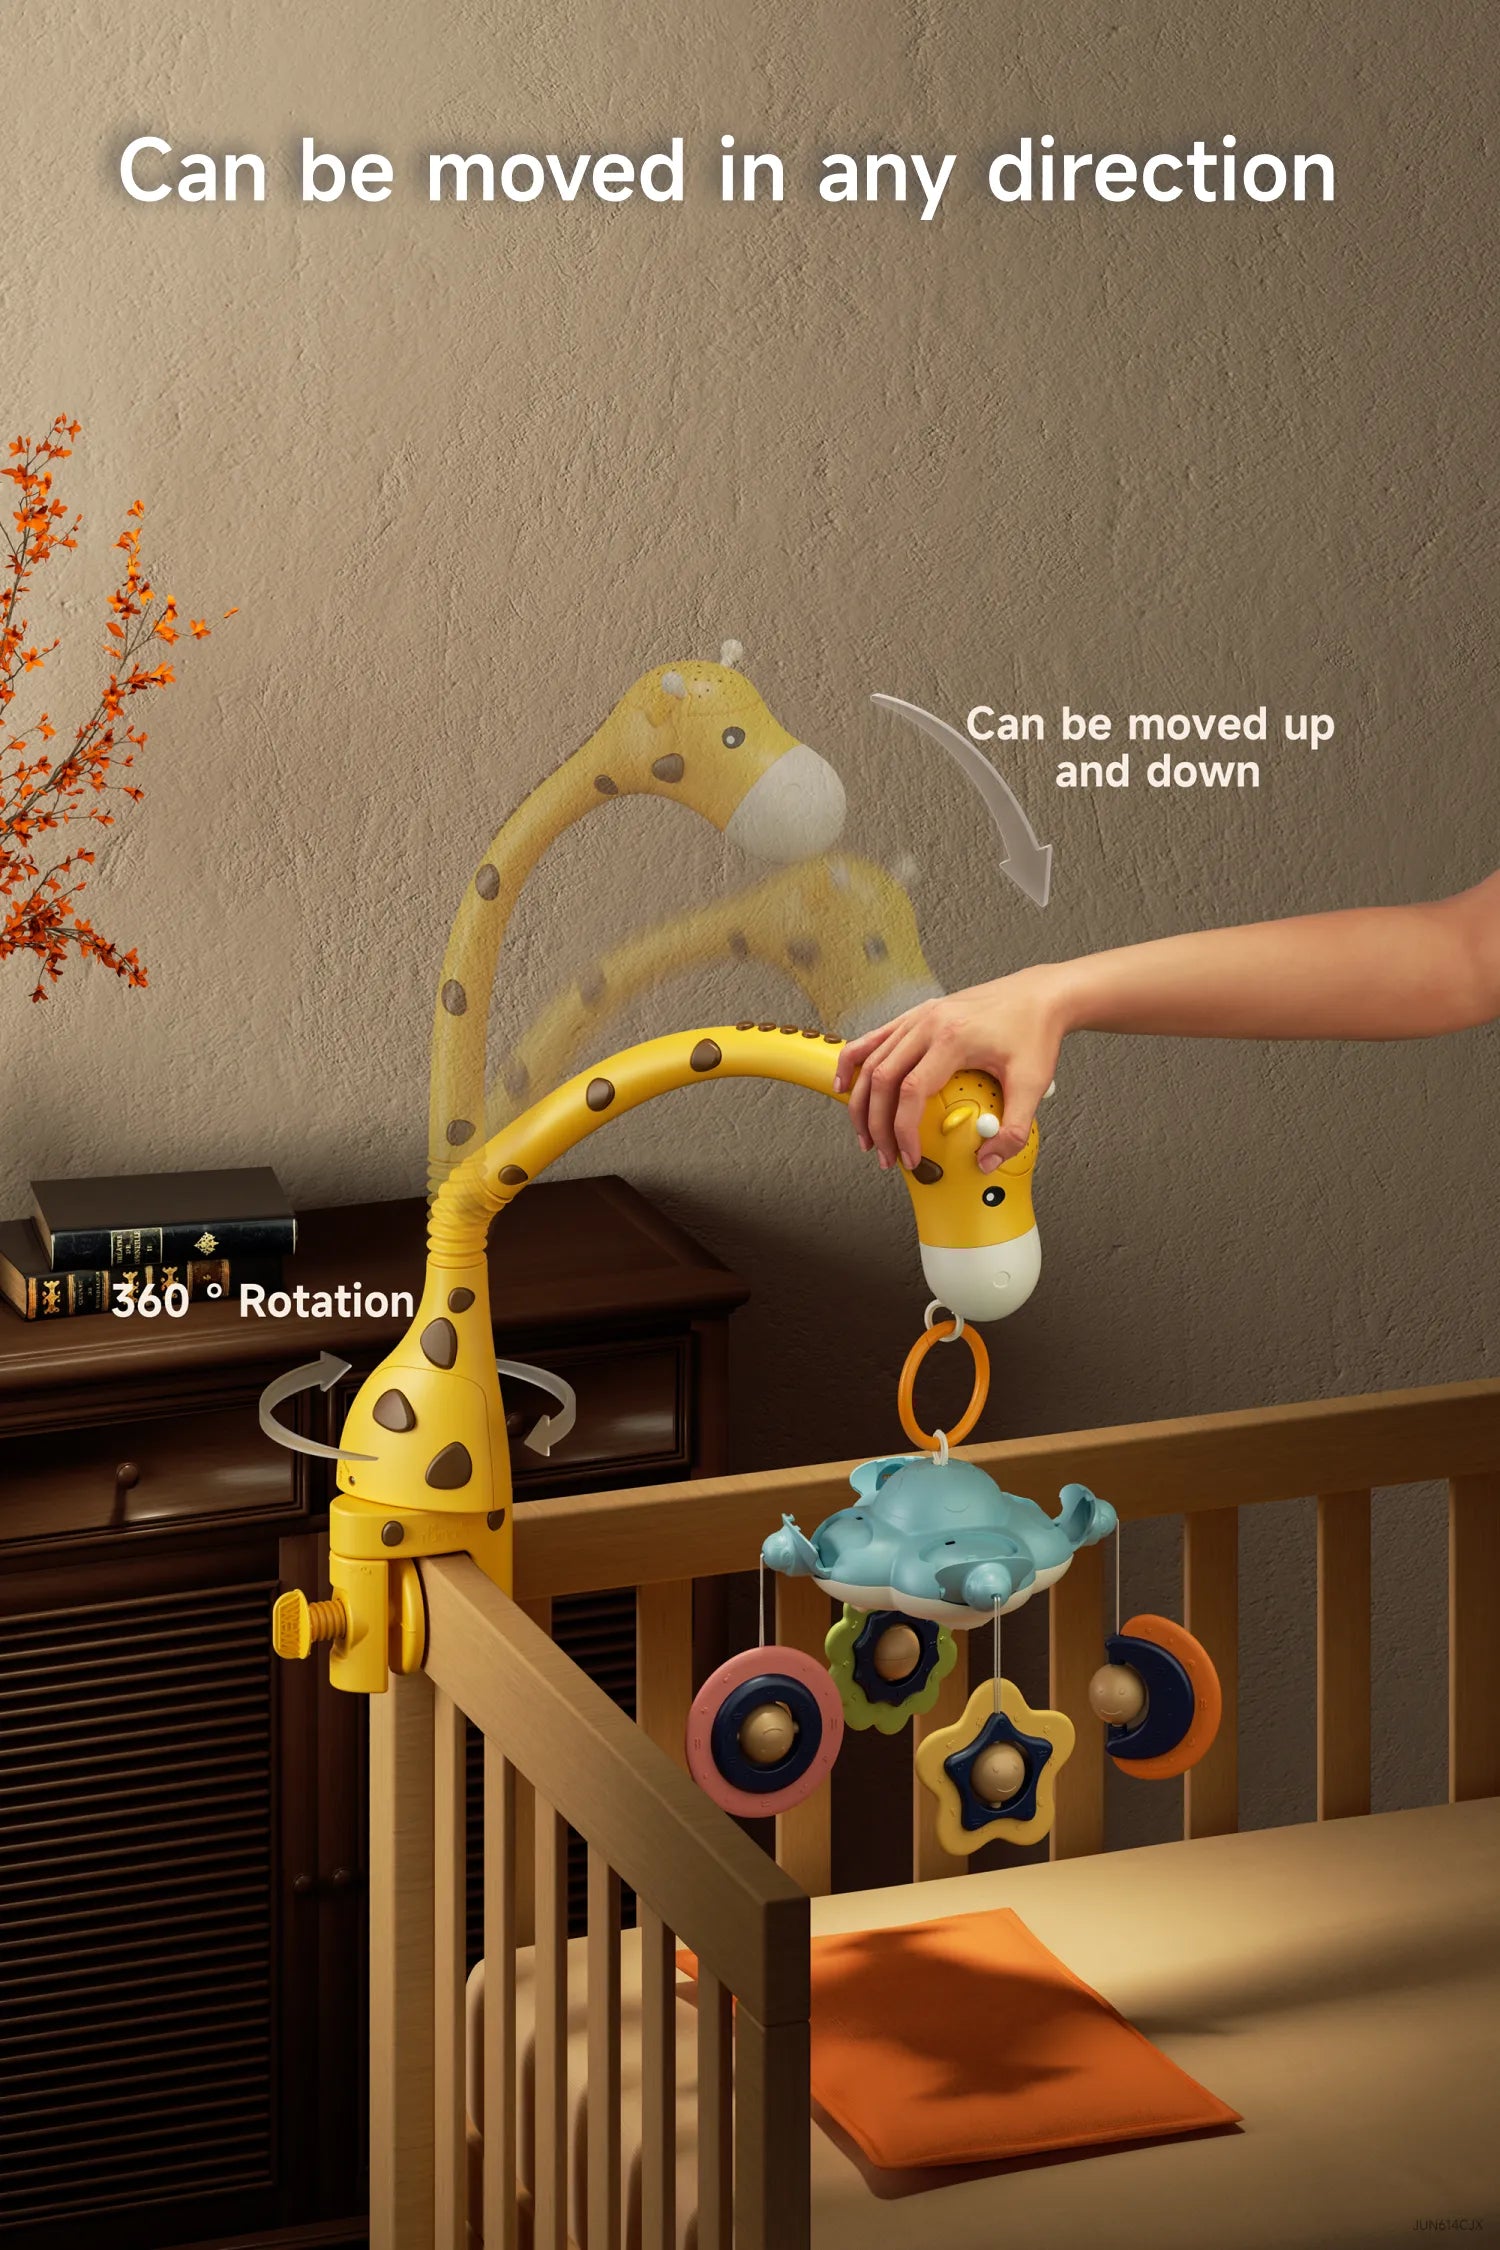 Baby Giraffe Toy can be moved in any direction